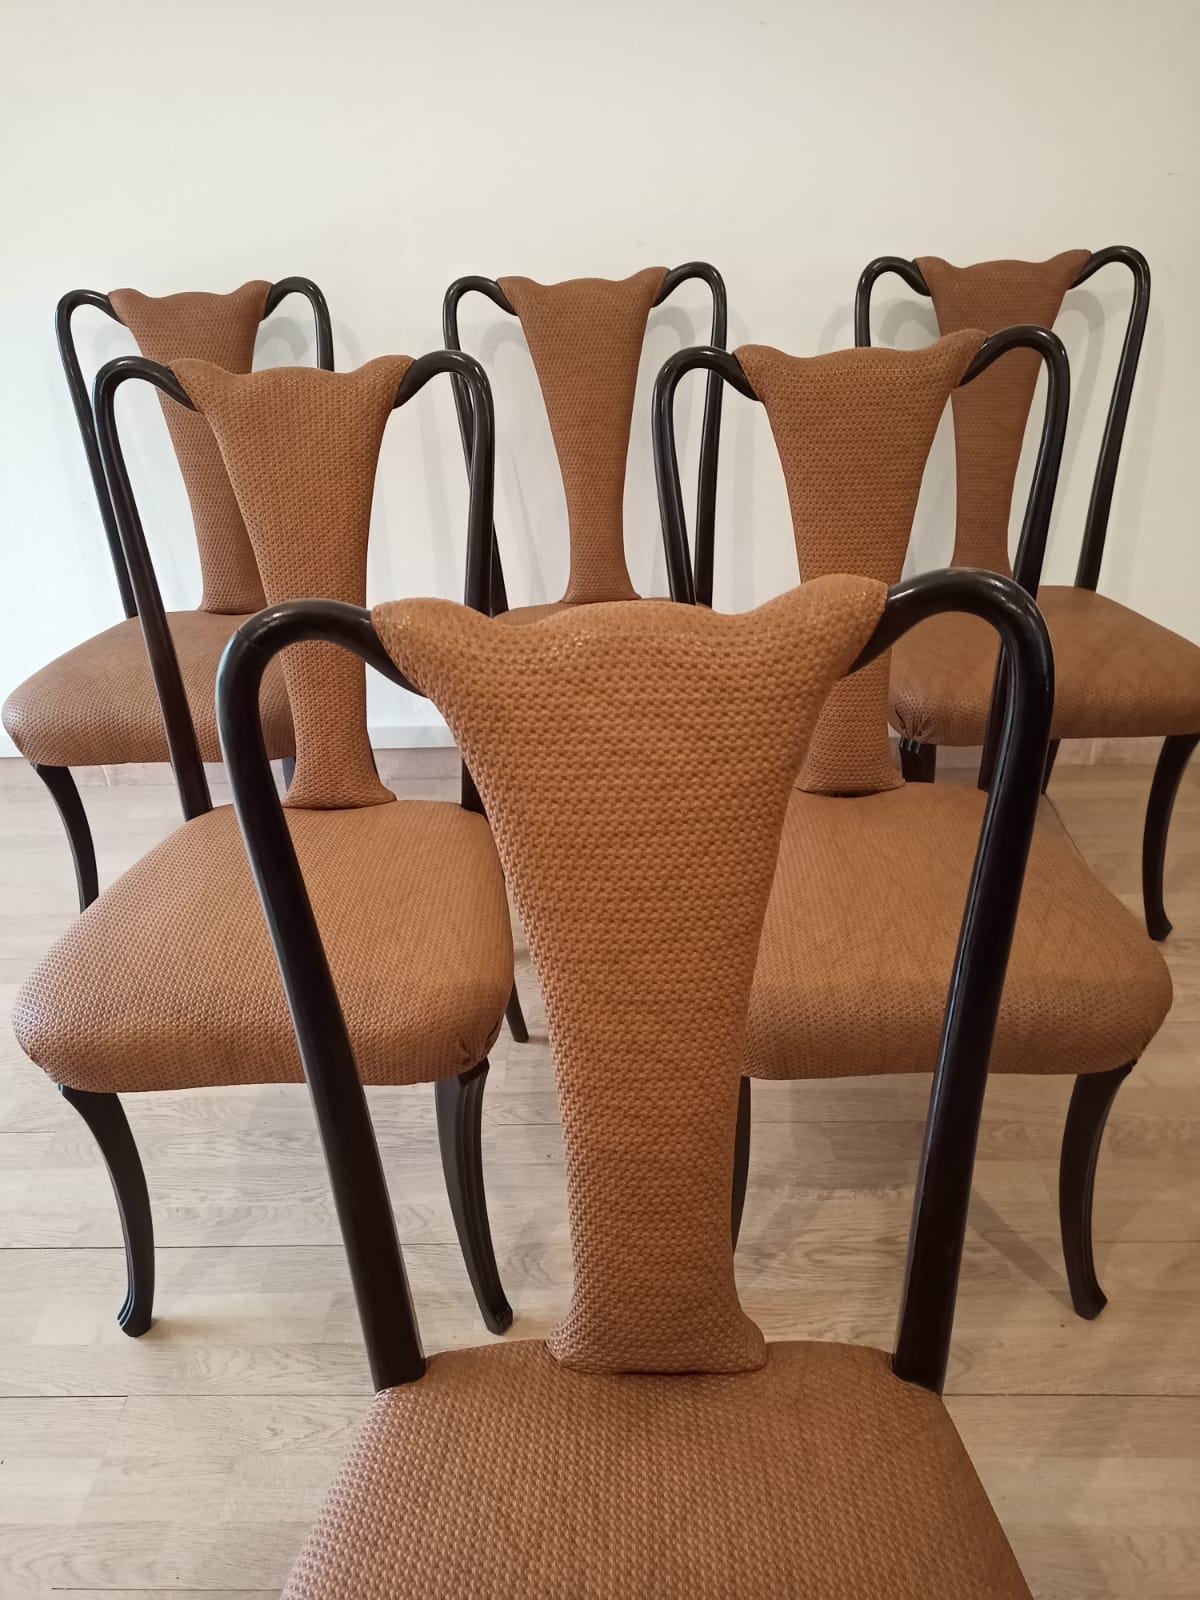 Six Mid 20th Century Vittorio Dassi Chairs Mid-Century Modern Leather Classical For Sale 2